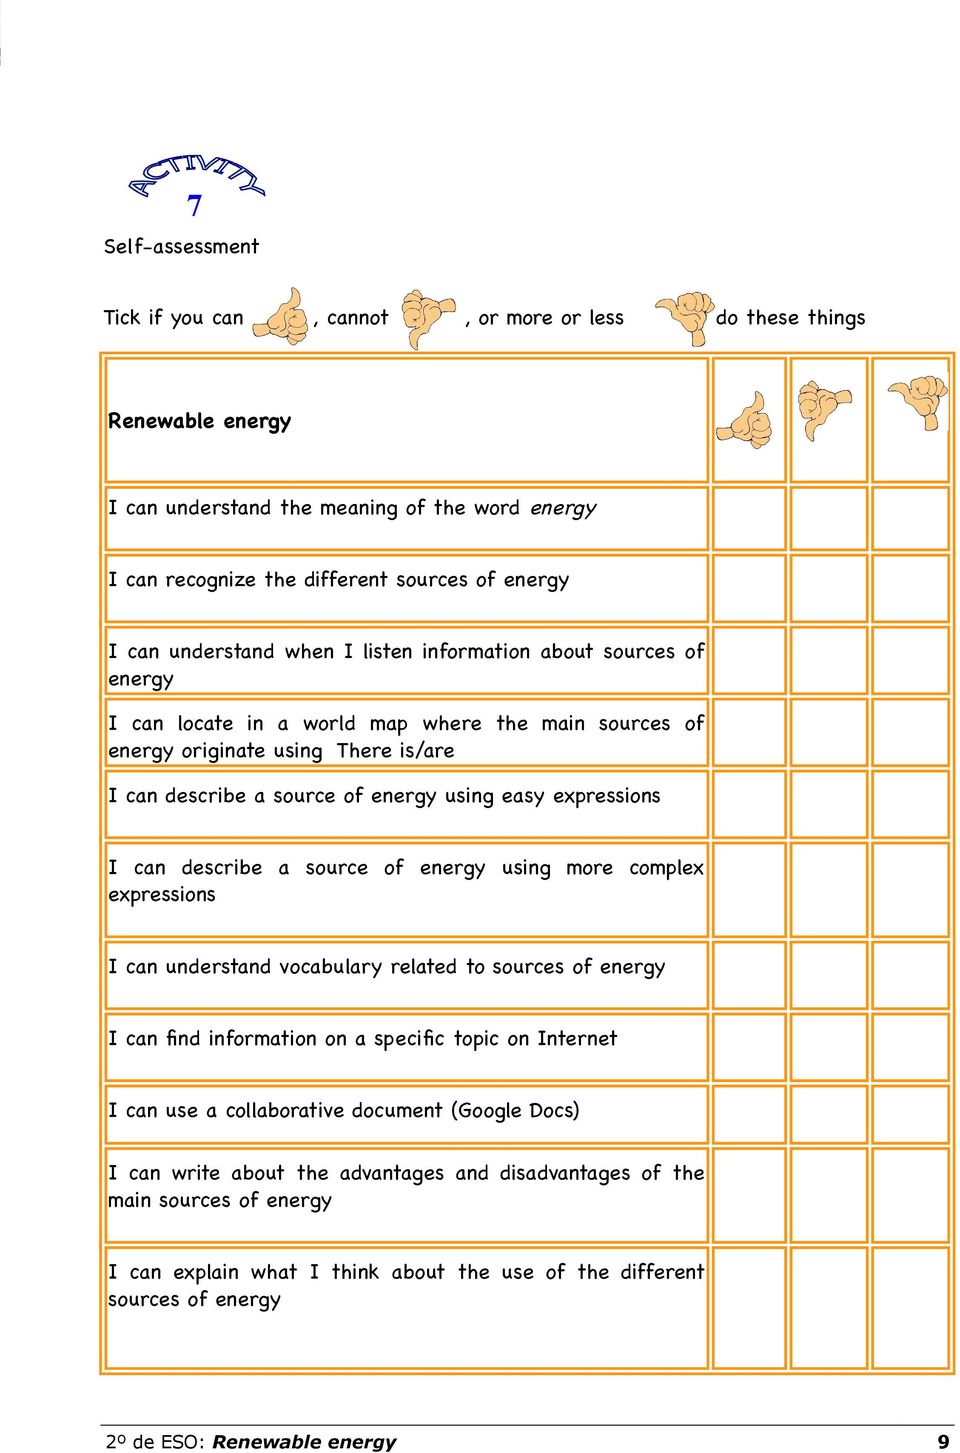 expressions I can describe a source of energy using more complex expressions I can understand vocabulary related to sources of energy I can find information on a specific topic on Internet I can use